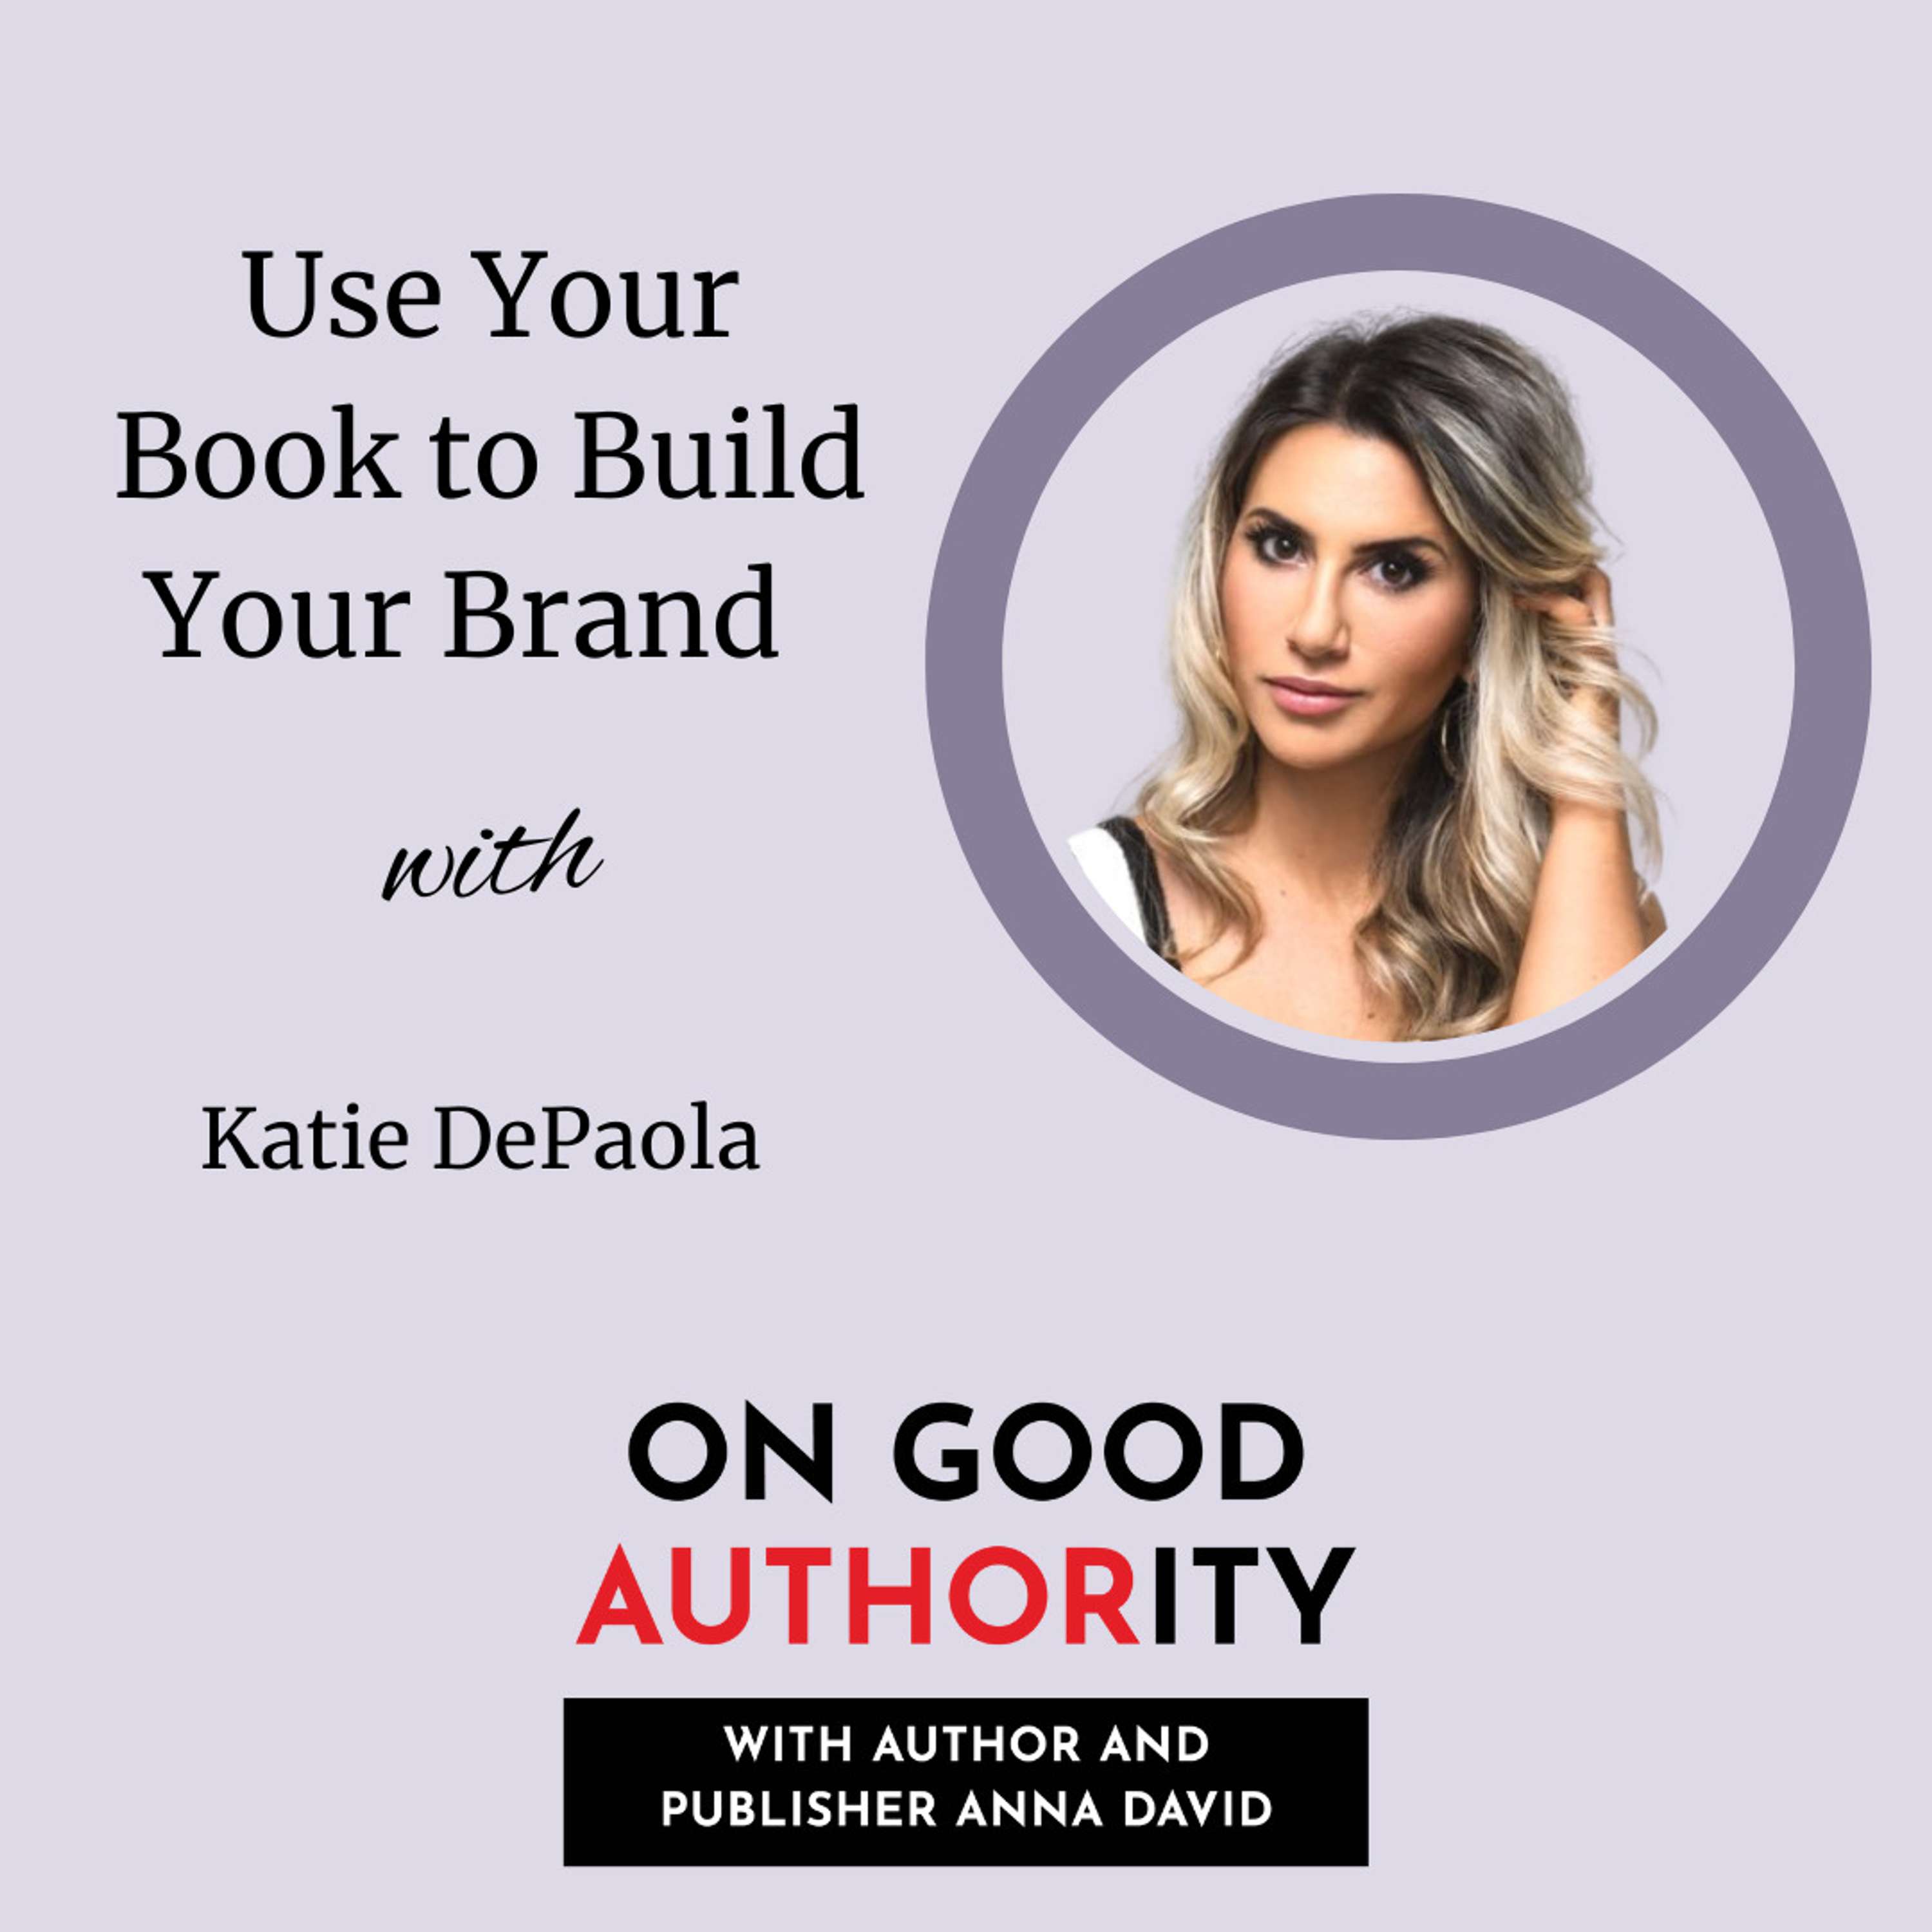 Use Your Book to Build Your Brand with Katie DePaola